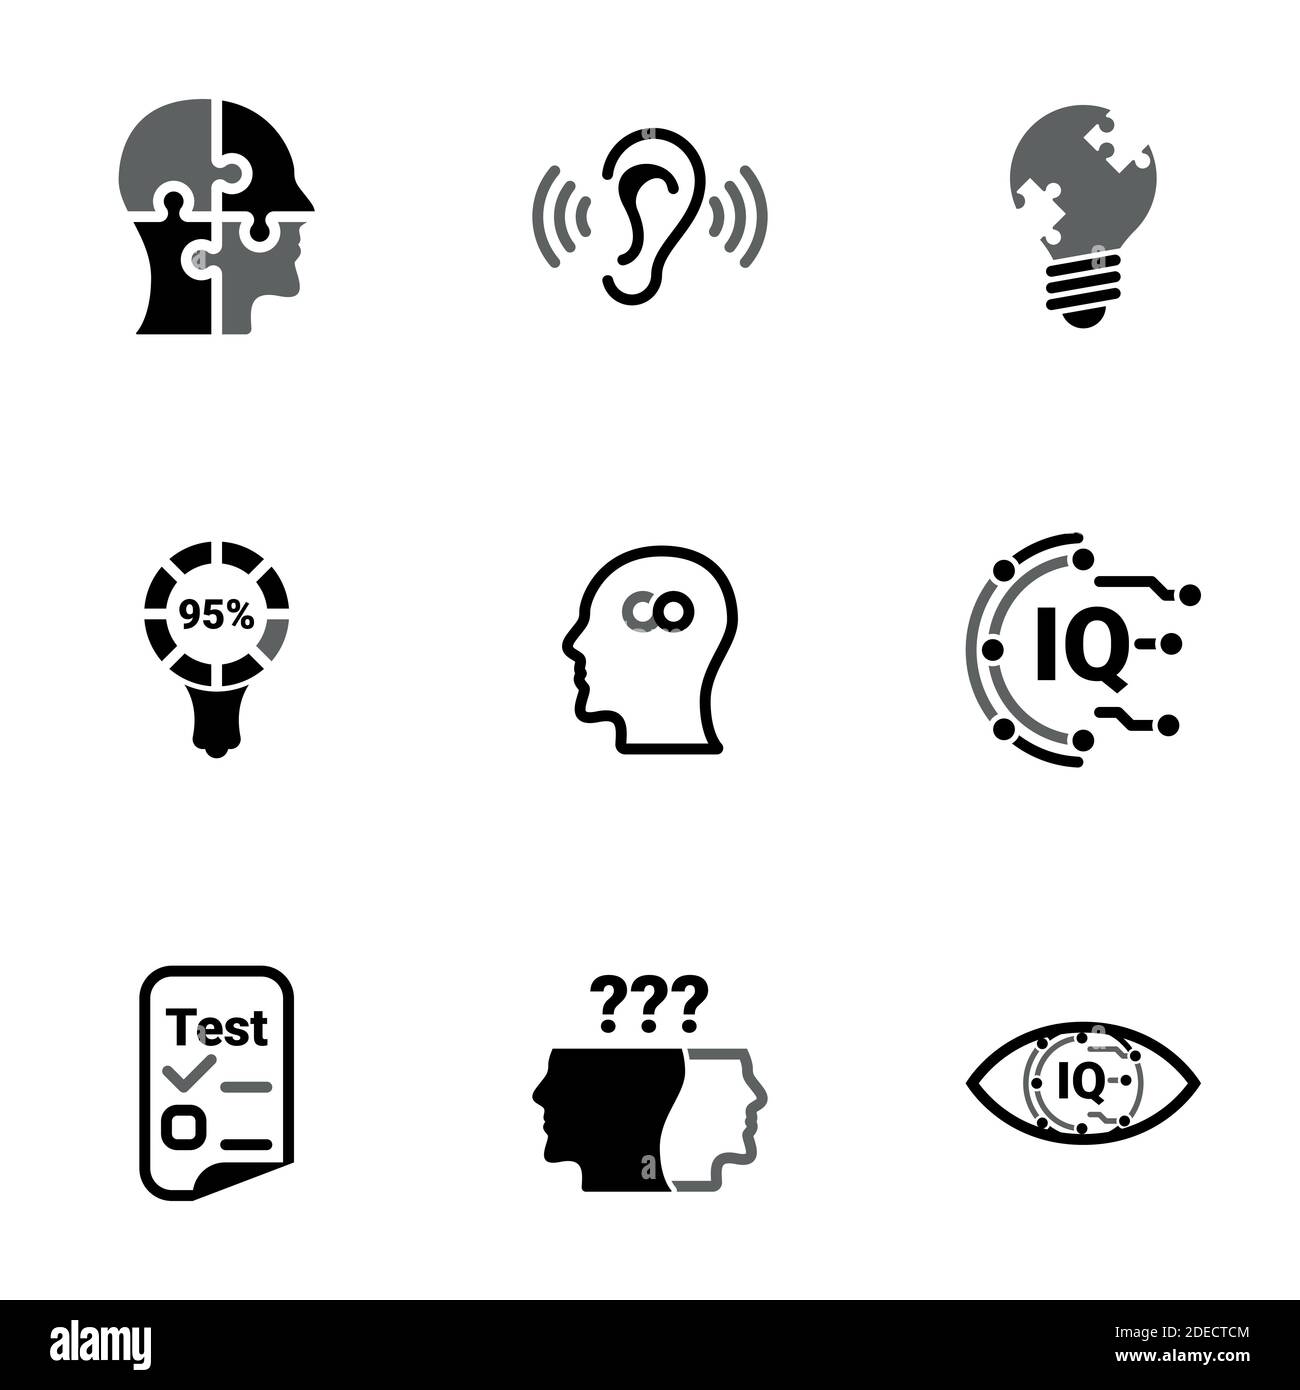 Set of simple icons on a theme Intellect, research, mind, brain, person, vector, set. Black icons isolated against white background Stock Vector